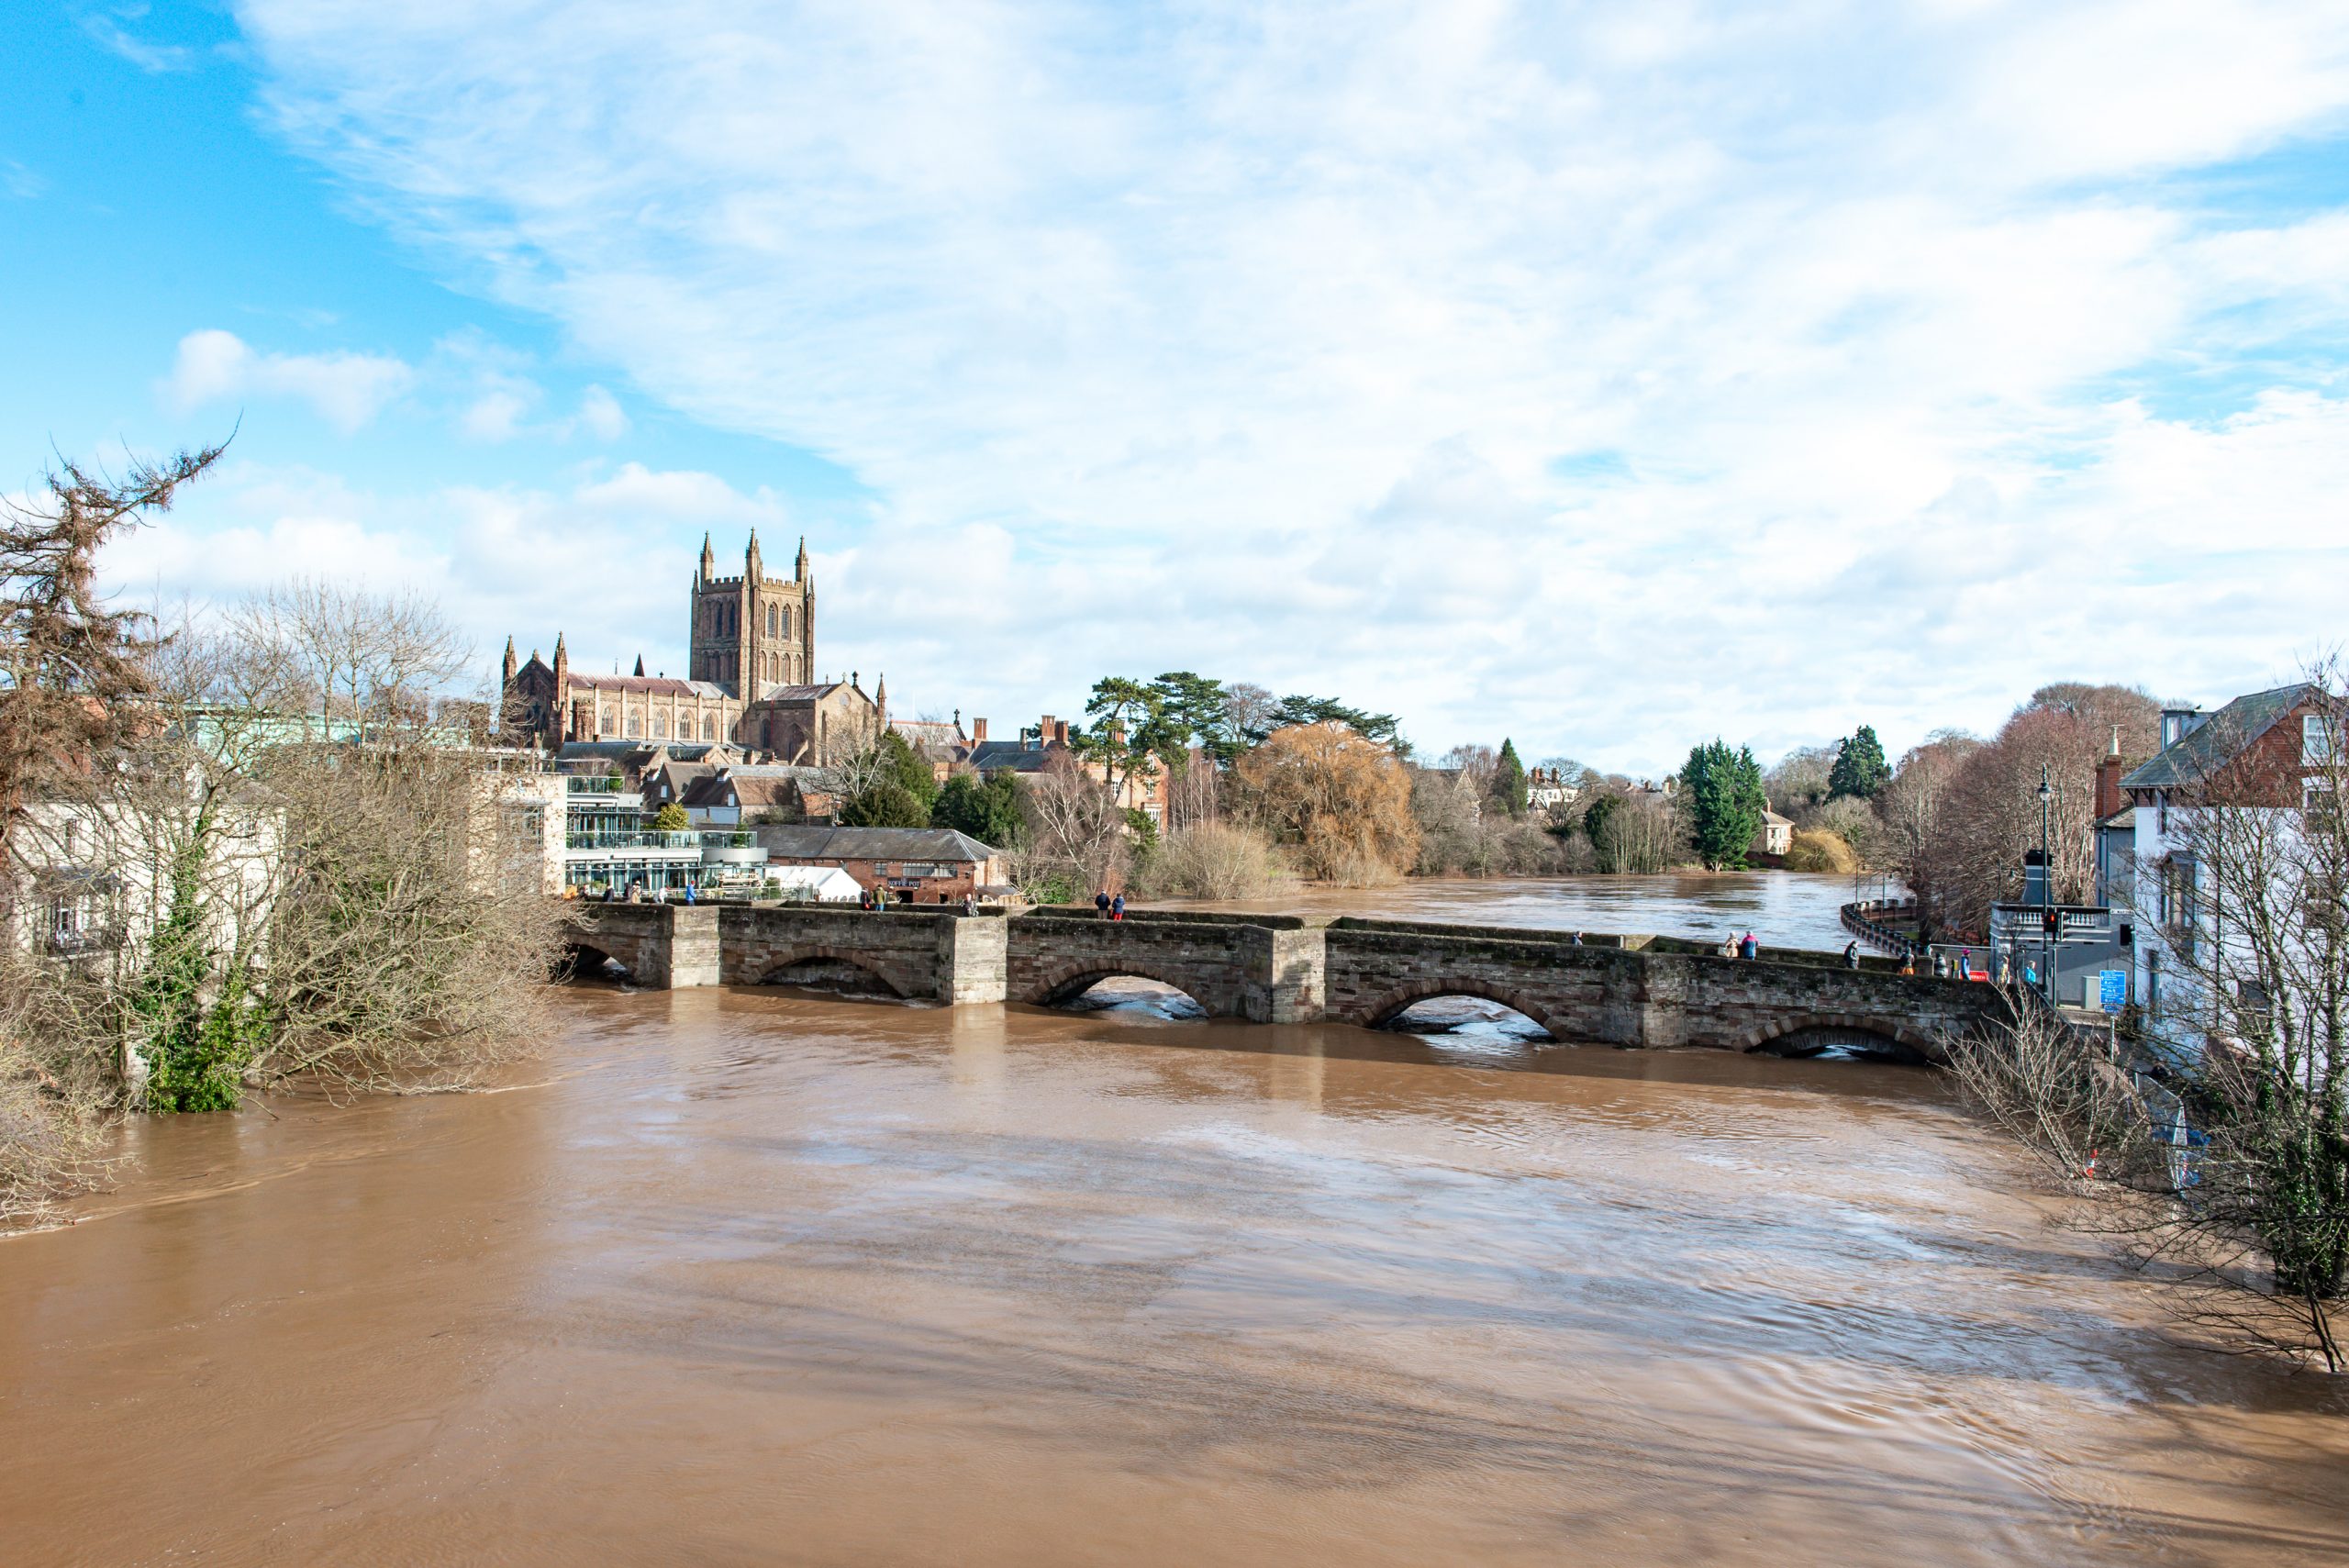 NEWS | Flood Alerts in force across Herefordshire as torrential rain falls on saturated ground – FULL DETAILS